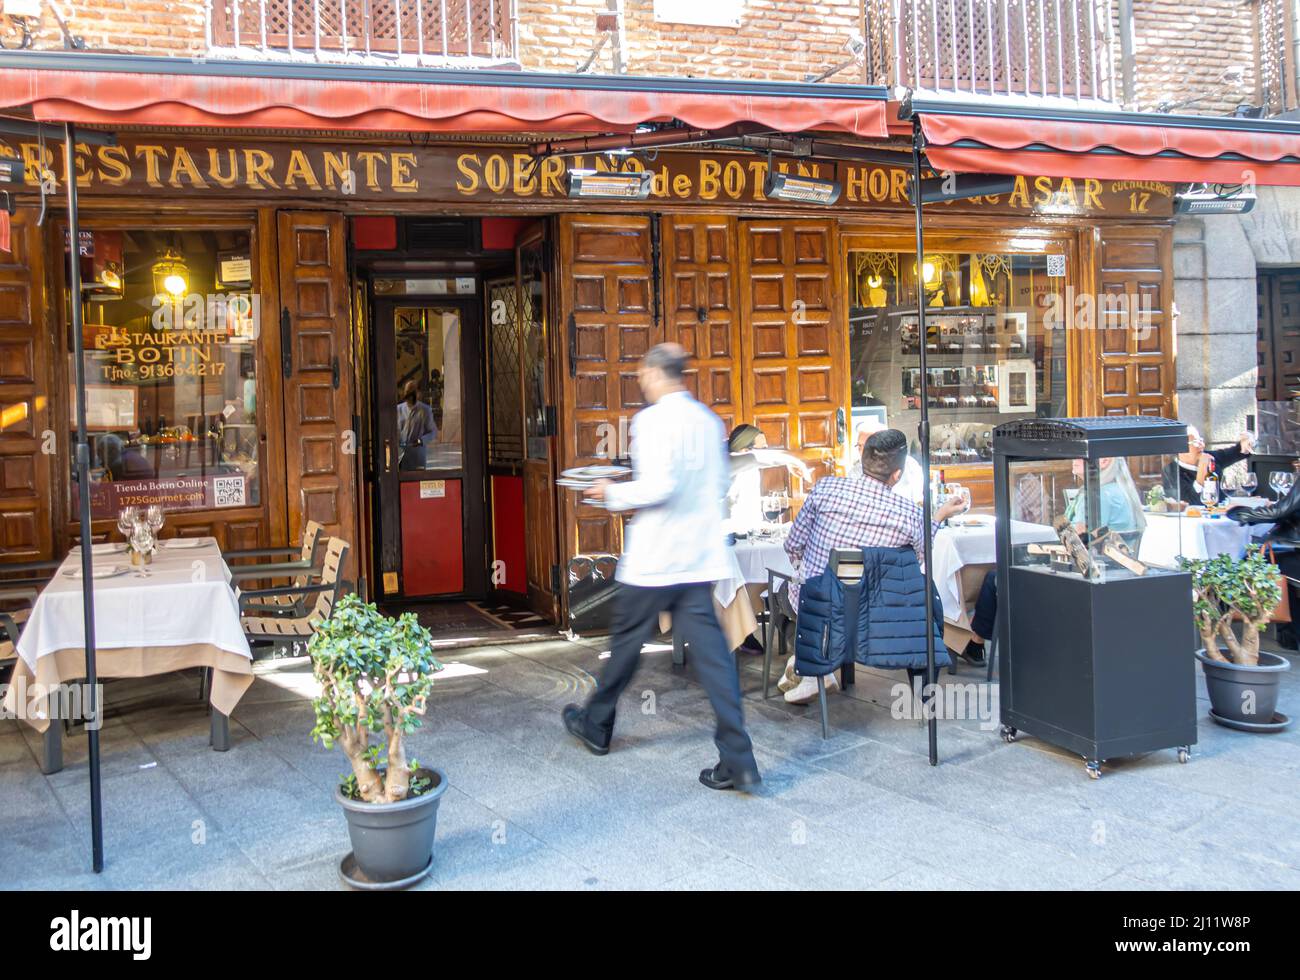 Spanish resturant Sabrino de Botin terrace, founded in 1725, it's the oldest restaurant in the world in continuous operation.Madrid, Spain Stock Photo